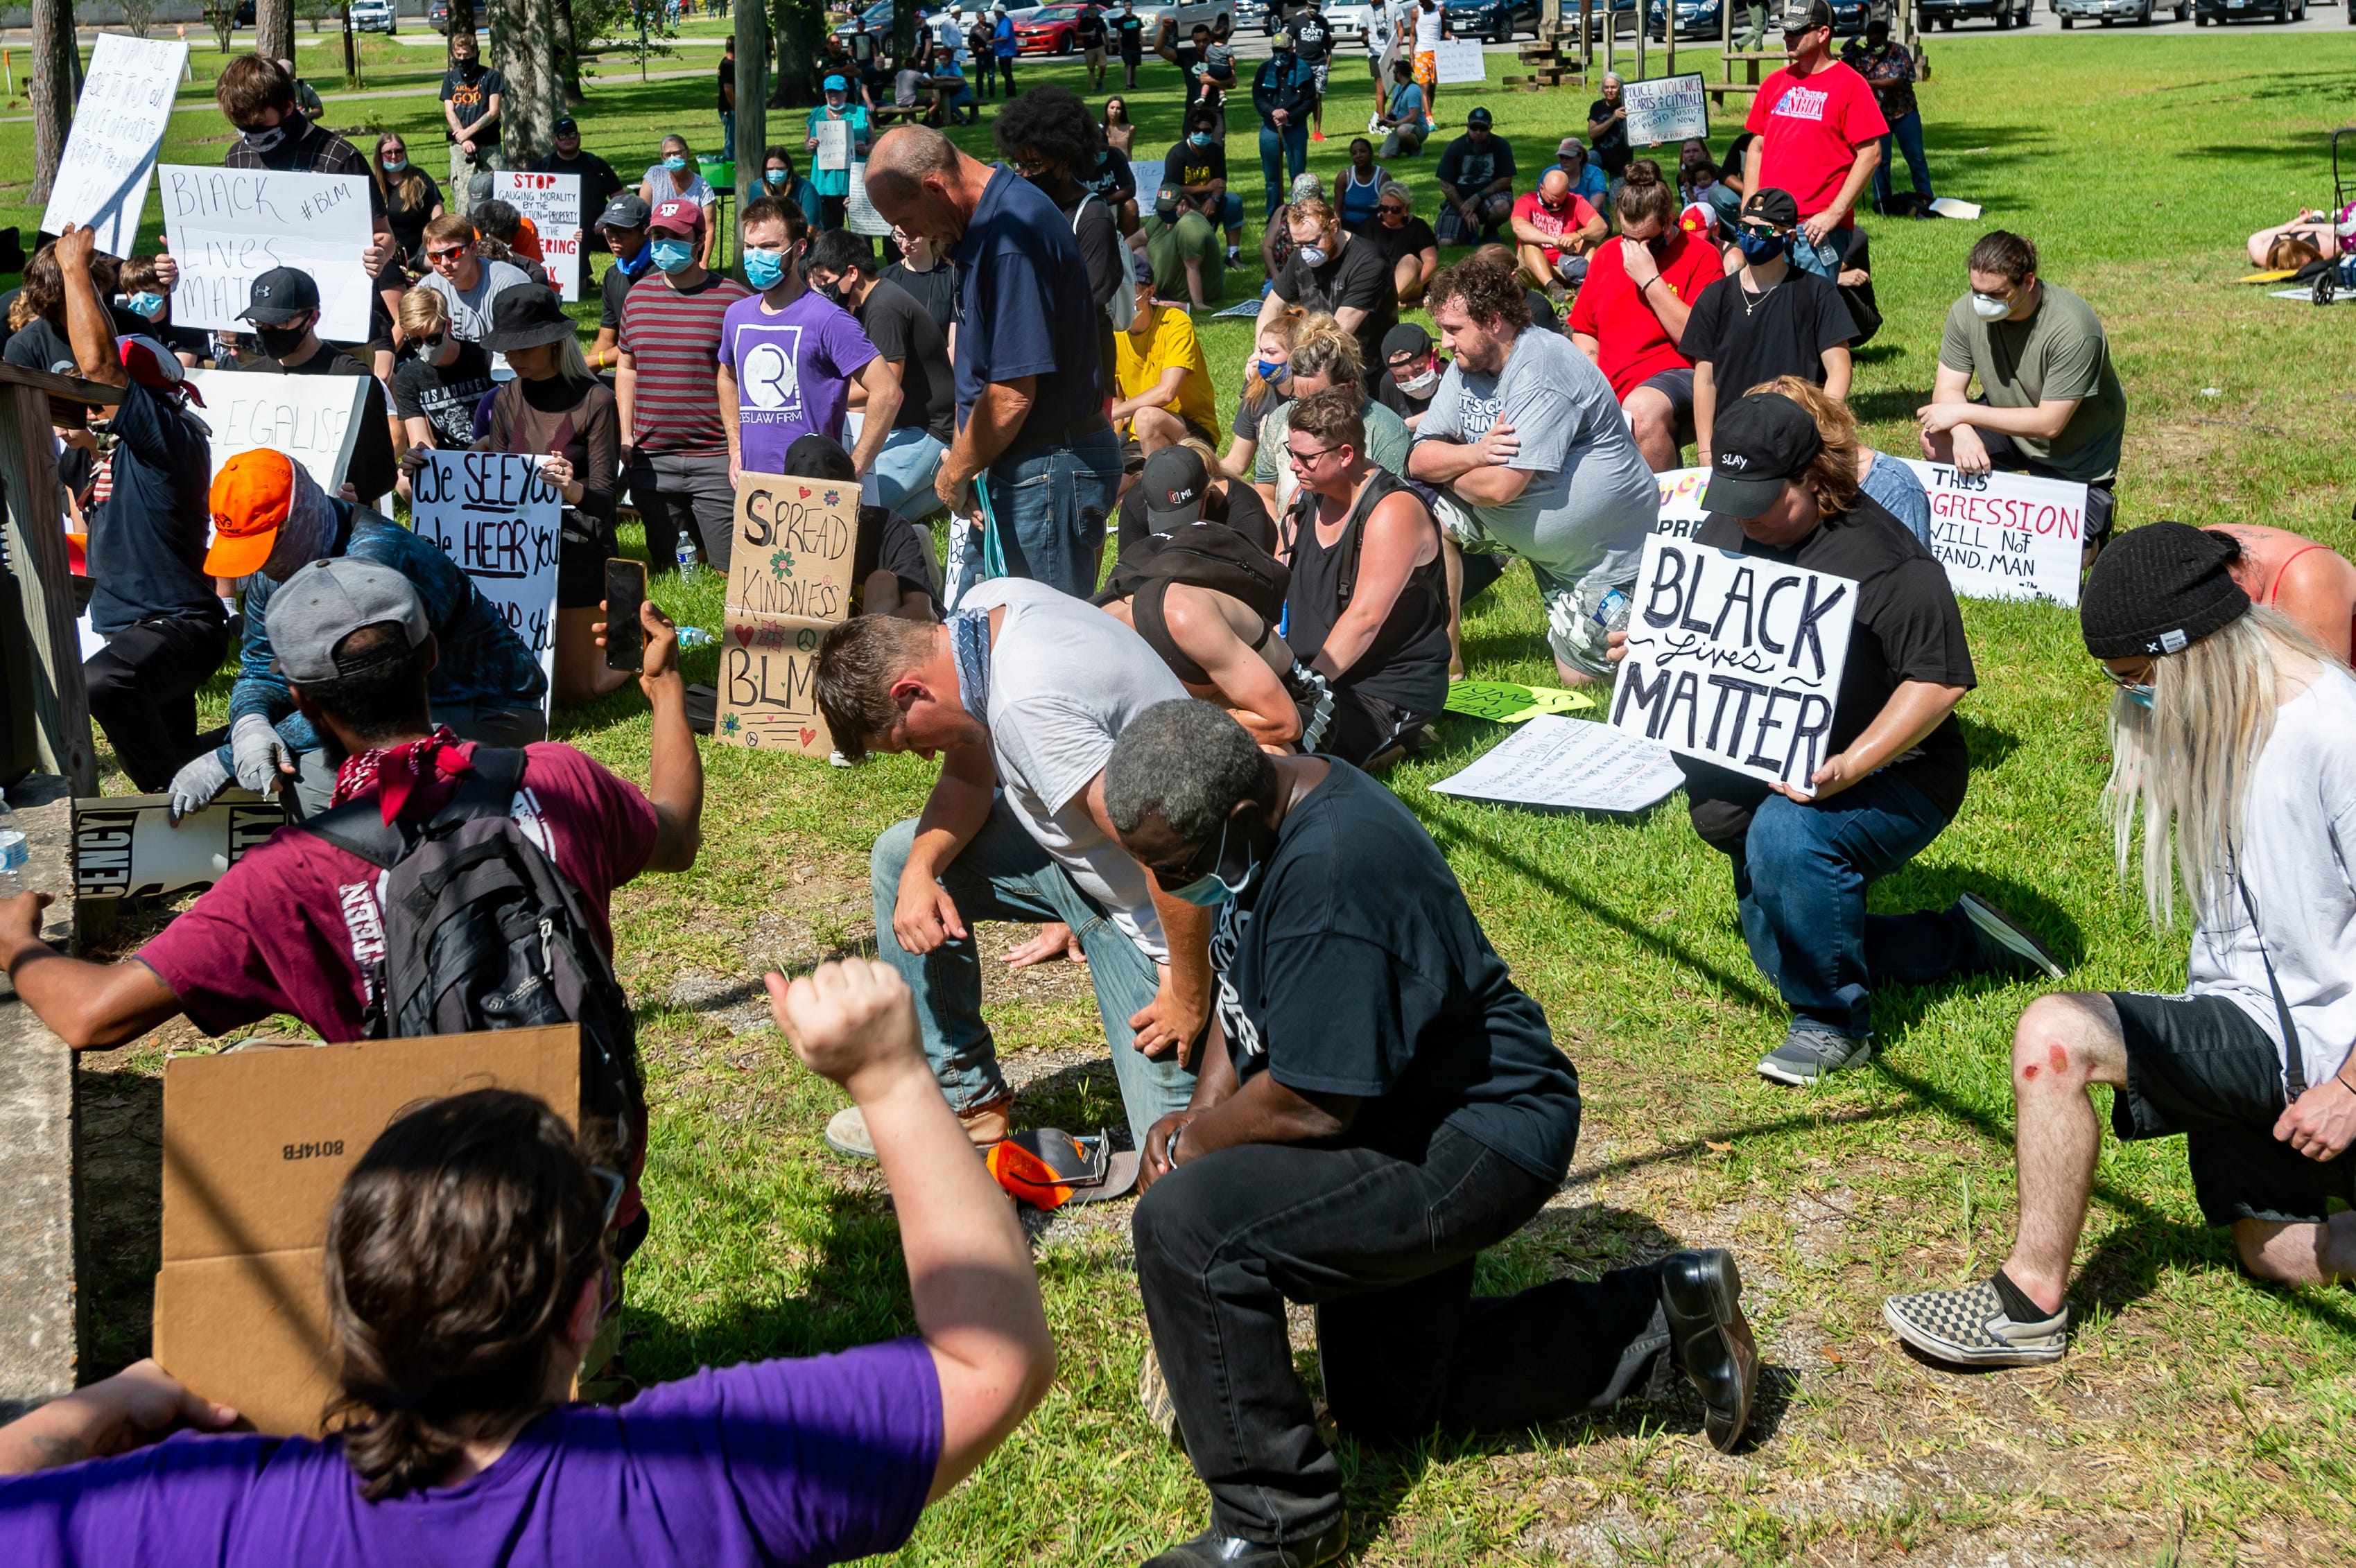 In a Saturday, June 6, 2020 photo, protesters observe an eight minute and forty-six second moment of silence in honor of George Floyd in Gould Park in Vidor, Texas. Several hundred people came out to the park on Saturday afternoon for a protest and peace march in honor of George Floyd who died while being detained by Minneapolis police. (Fran Ruchalski/The Beaumont Enterprise via AP)